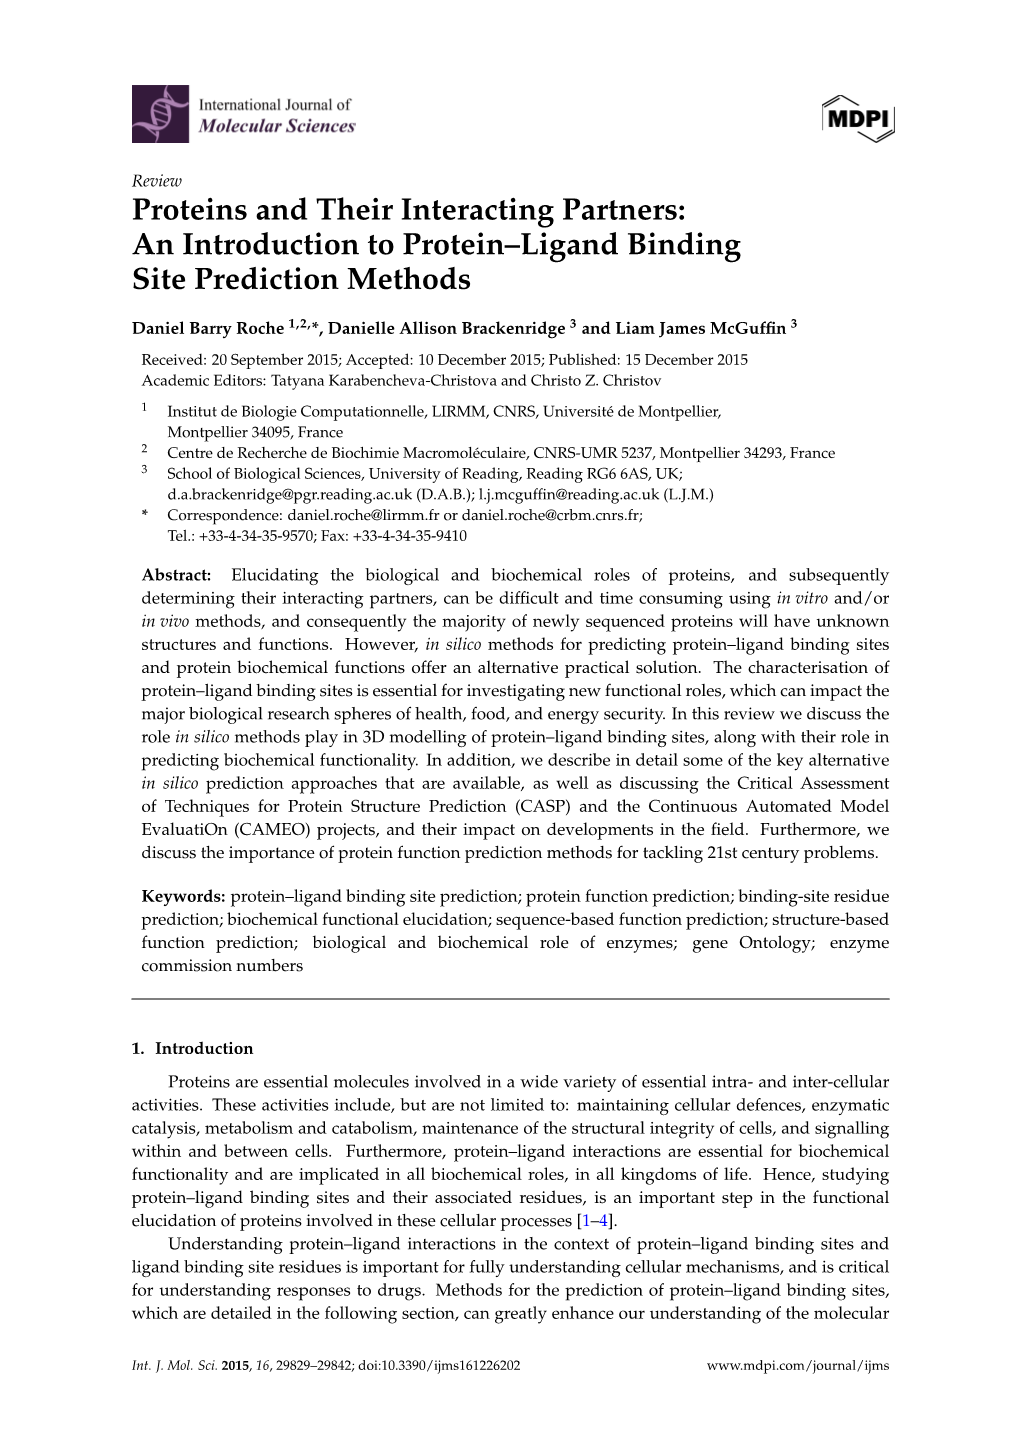 An Introduction to Protein–Ligand Binding Site Prediction Methods